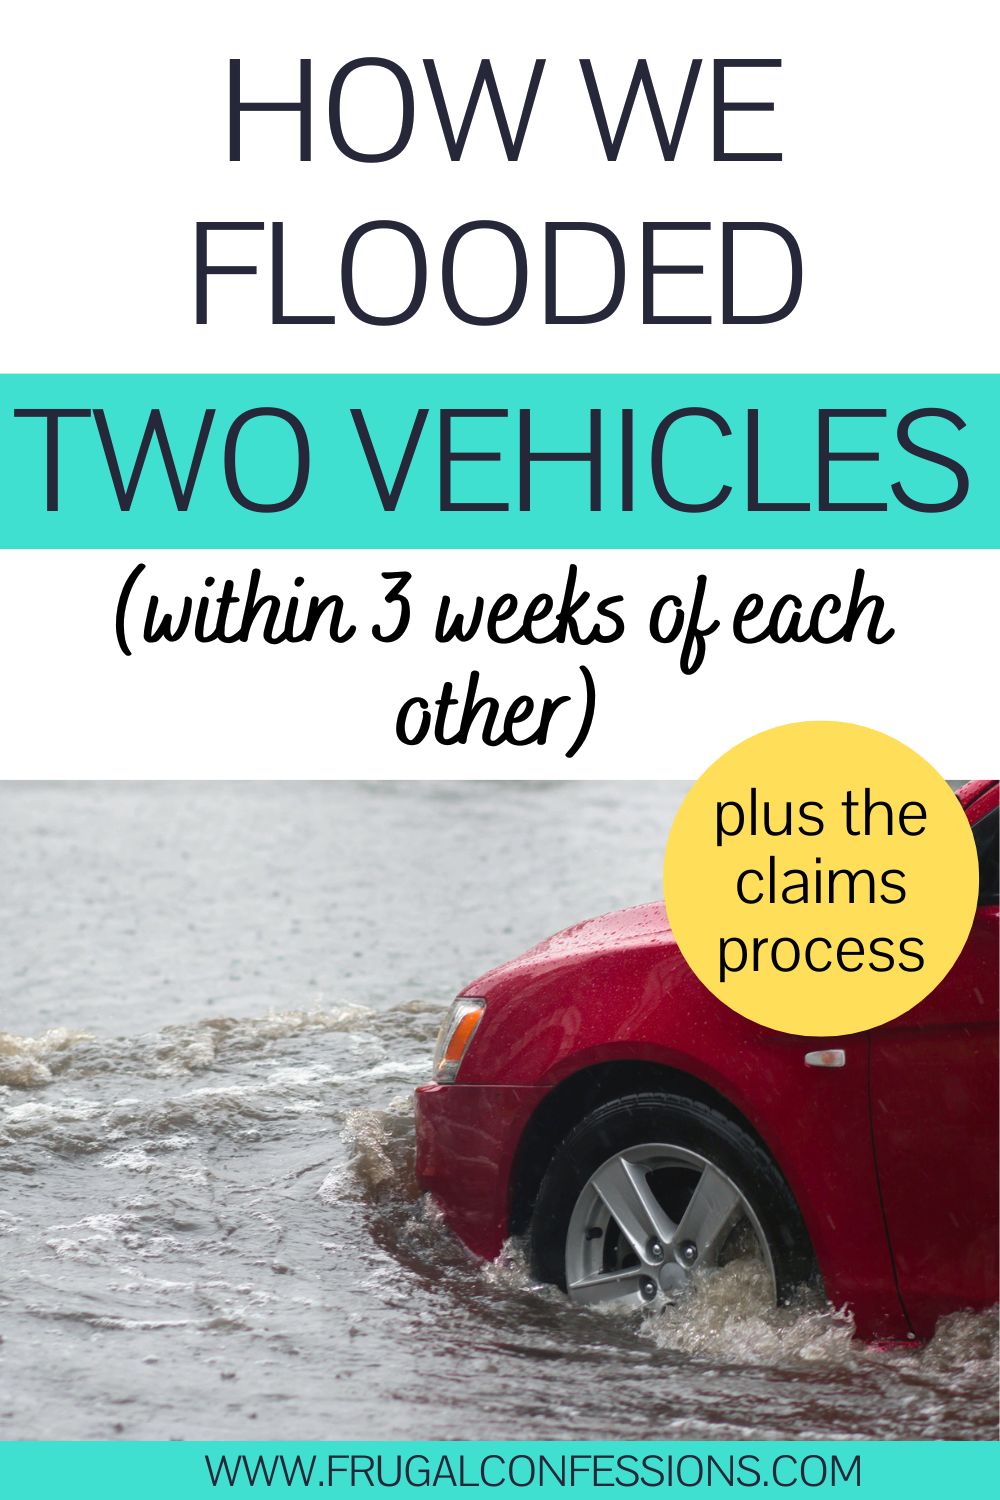 red car headed into flooded waters, text overlay "how we flooded two vehicles plus the claims process"